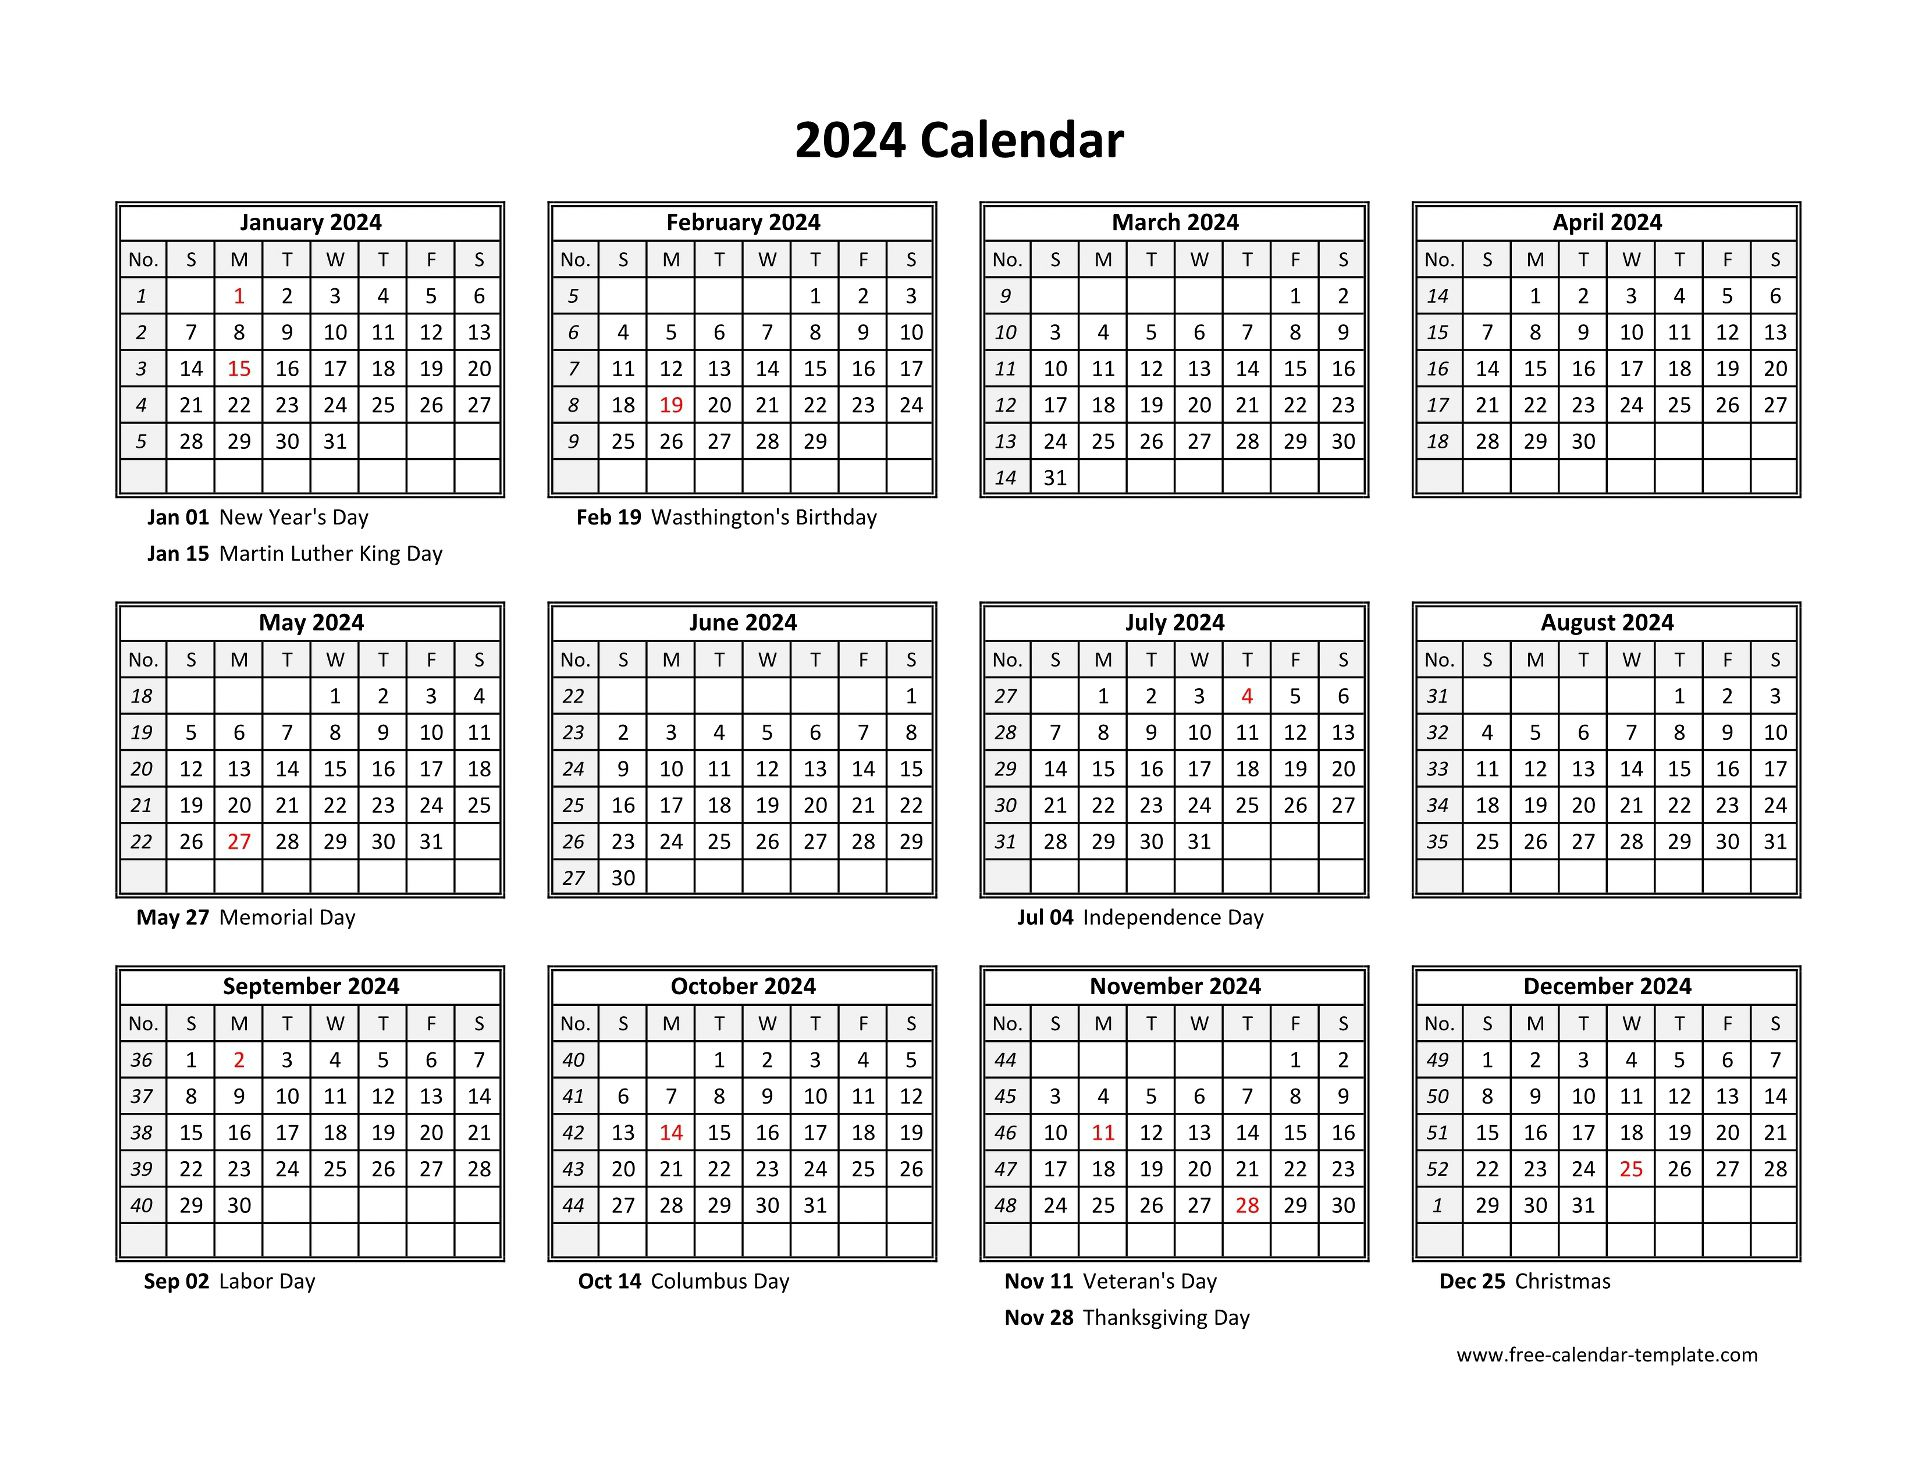 Yearly Calendar 2024 Printable With Federal Holidays | Free for 2024 Yearly Calendar Printable